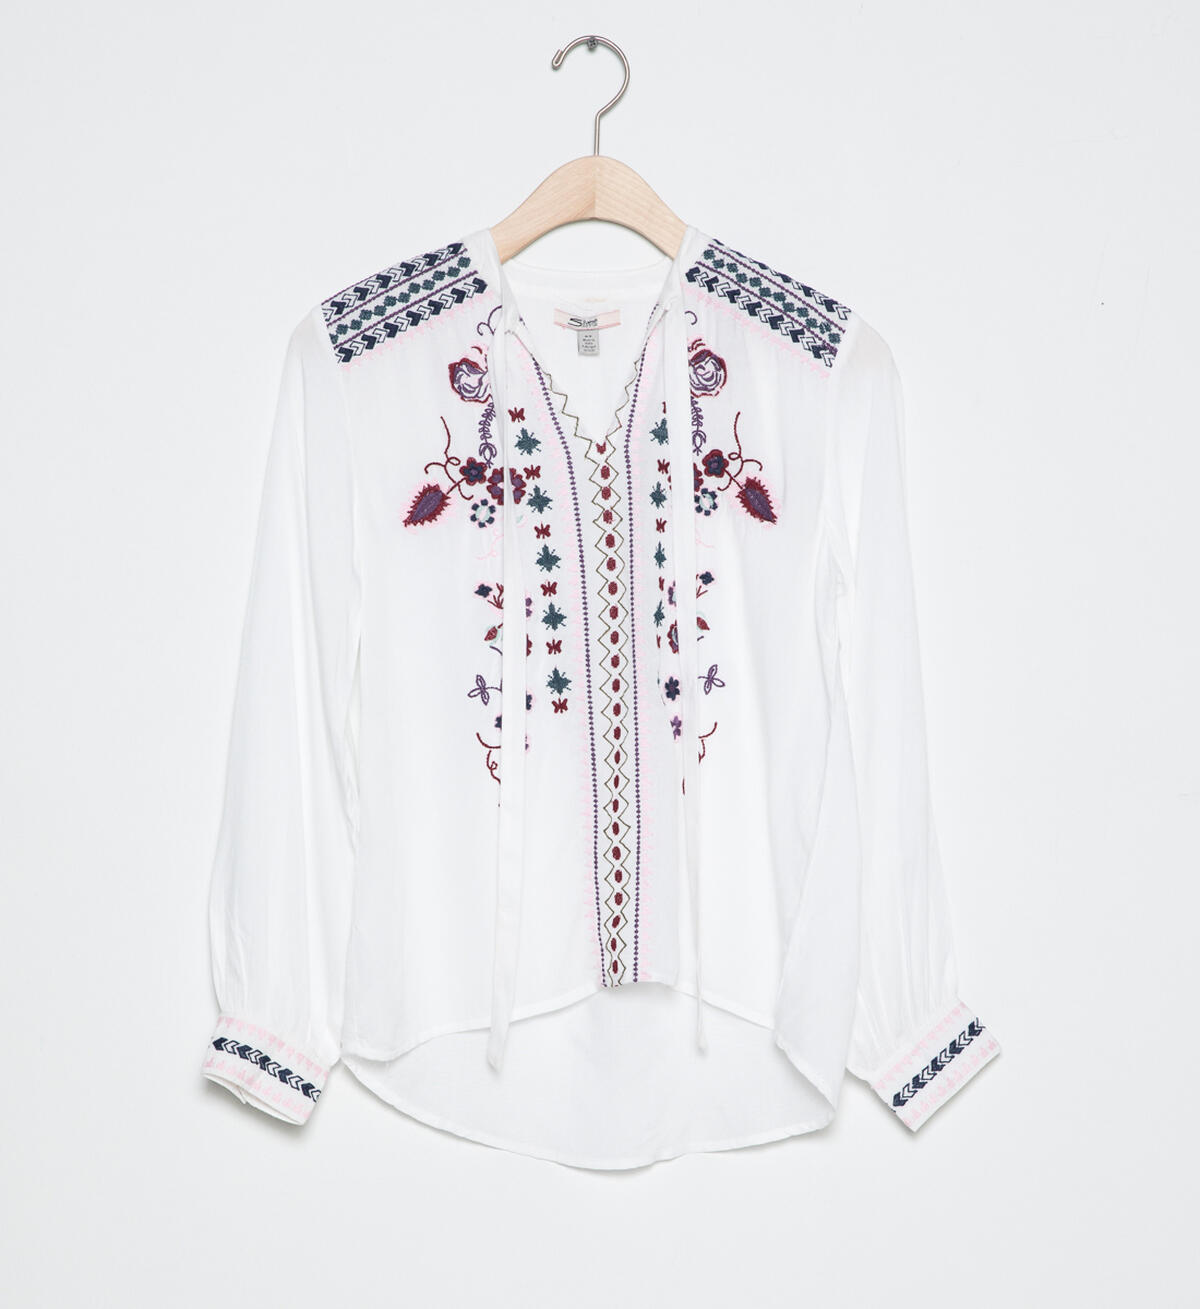 Long-Sleeve Embroidered Peasant Top (4-7), , hi-res image number 0